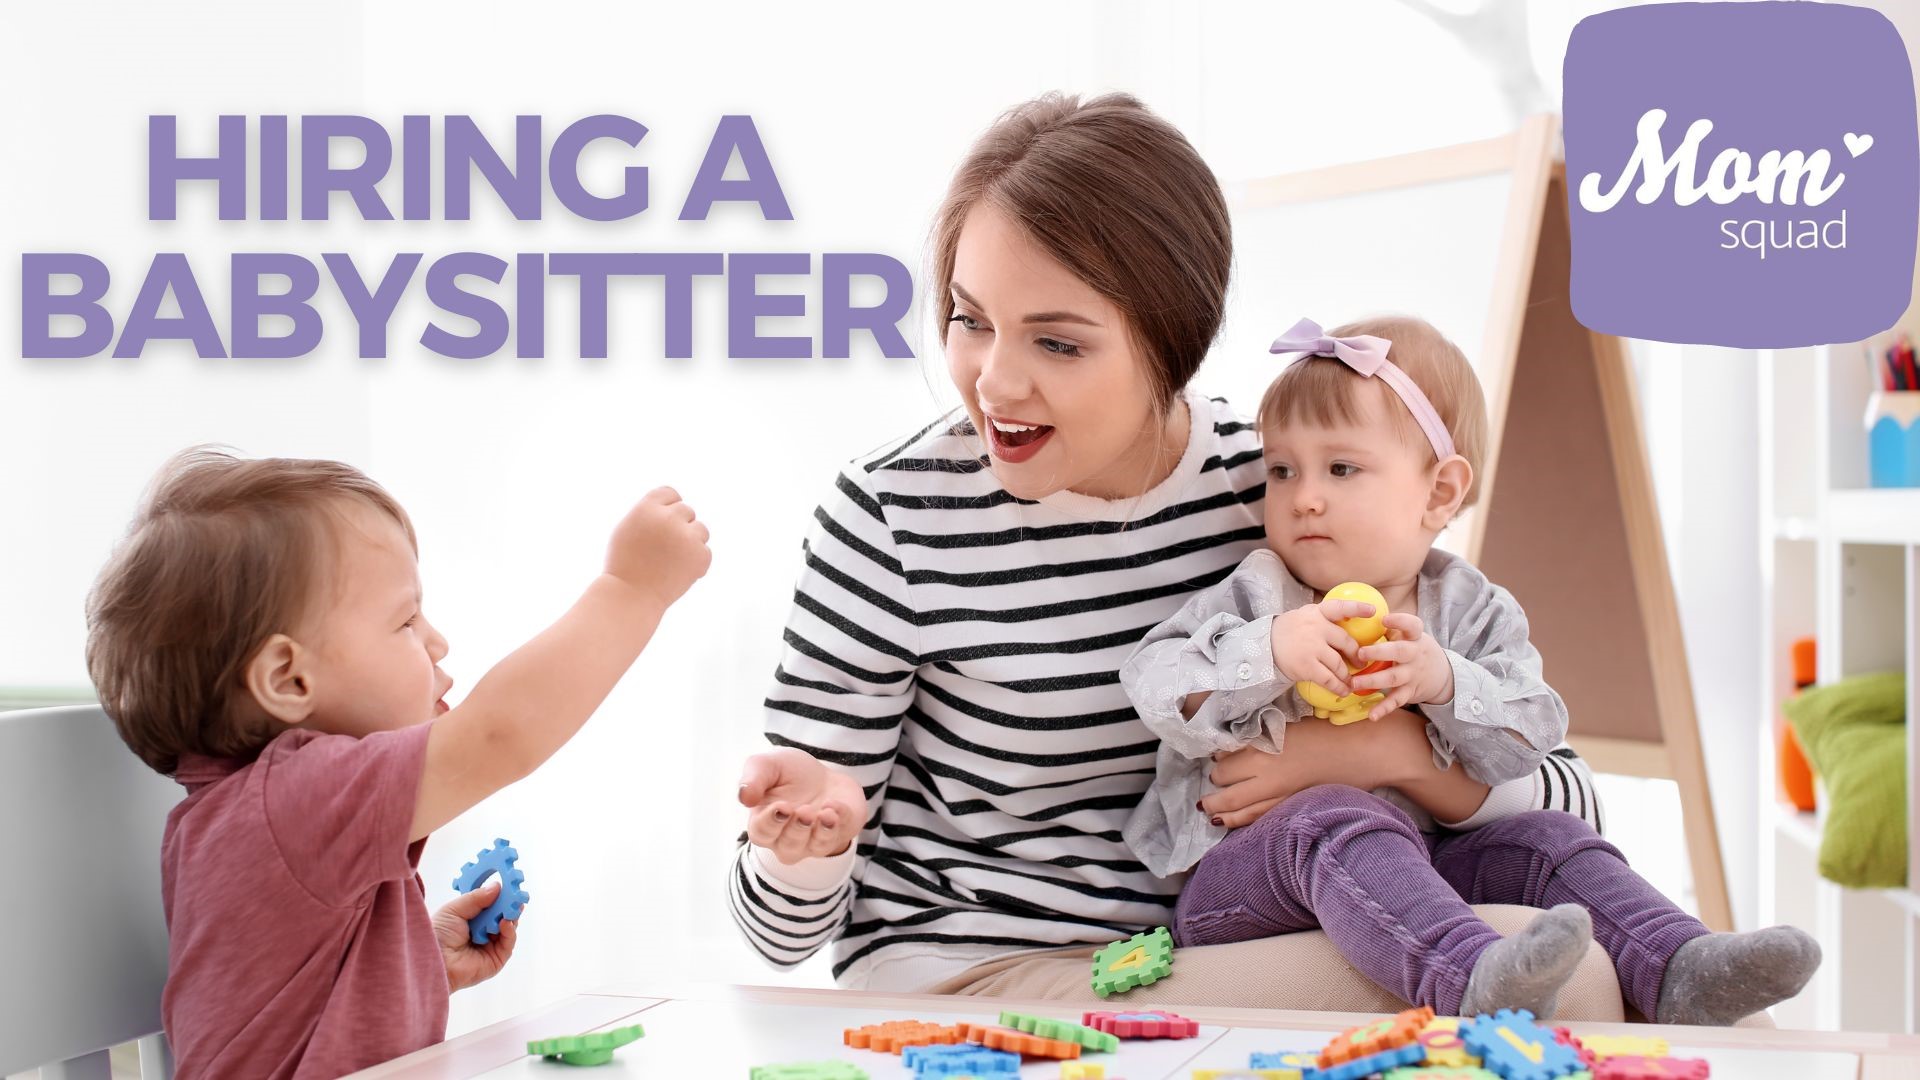 Hiring a babysitter to help cover for date nights can be tough. A look at how to find the right fit, the questions to ask and how to prepare your teen to babysit.